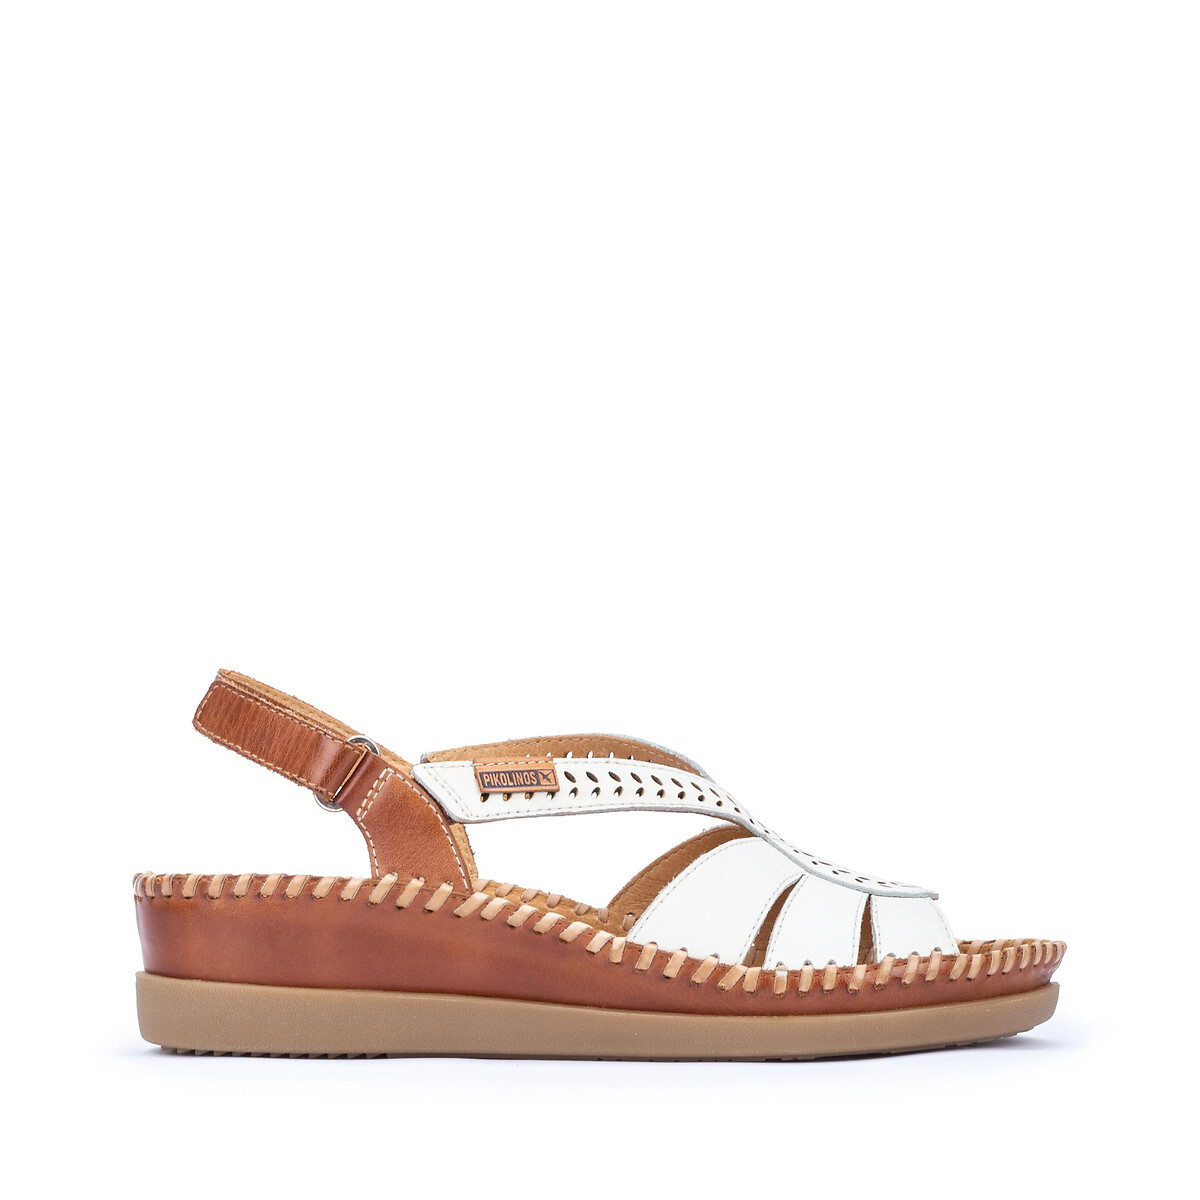 Cadaques leather sandals with wedge heel, white, Pikolinos | La Redoute